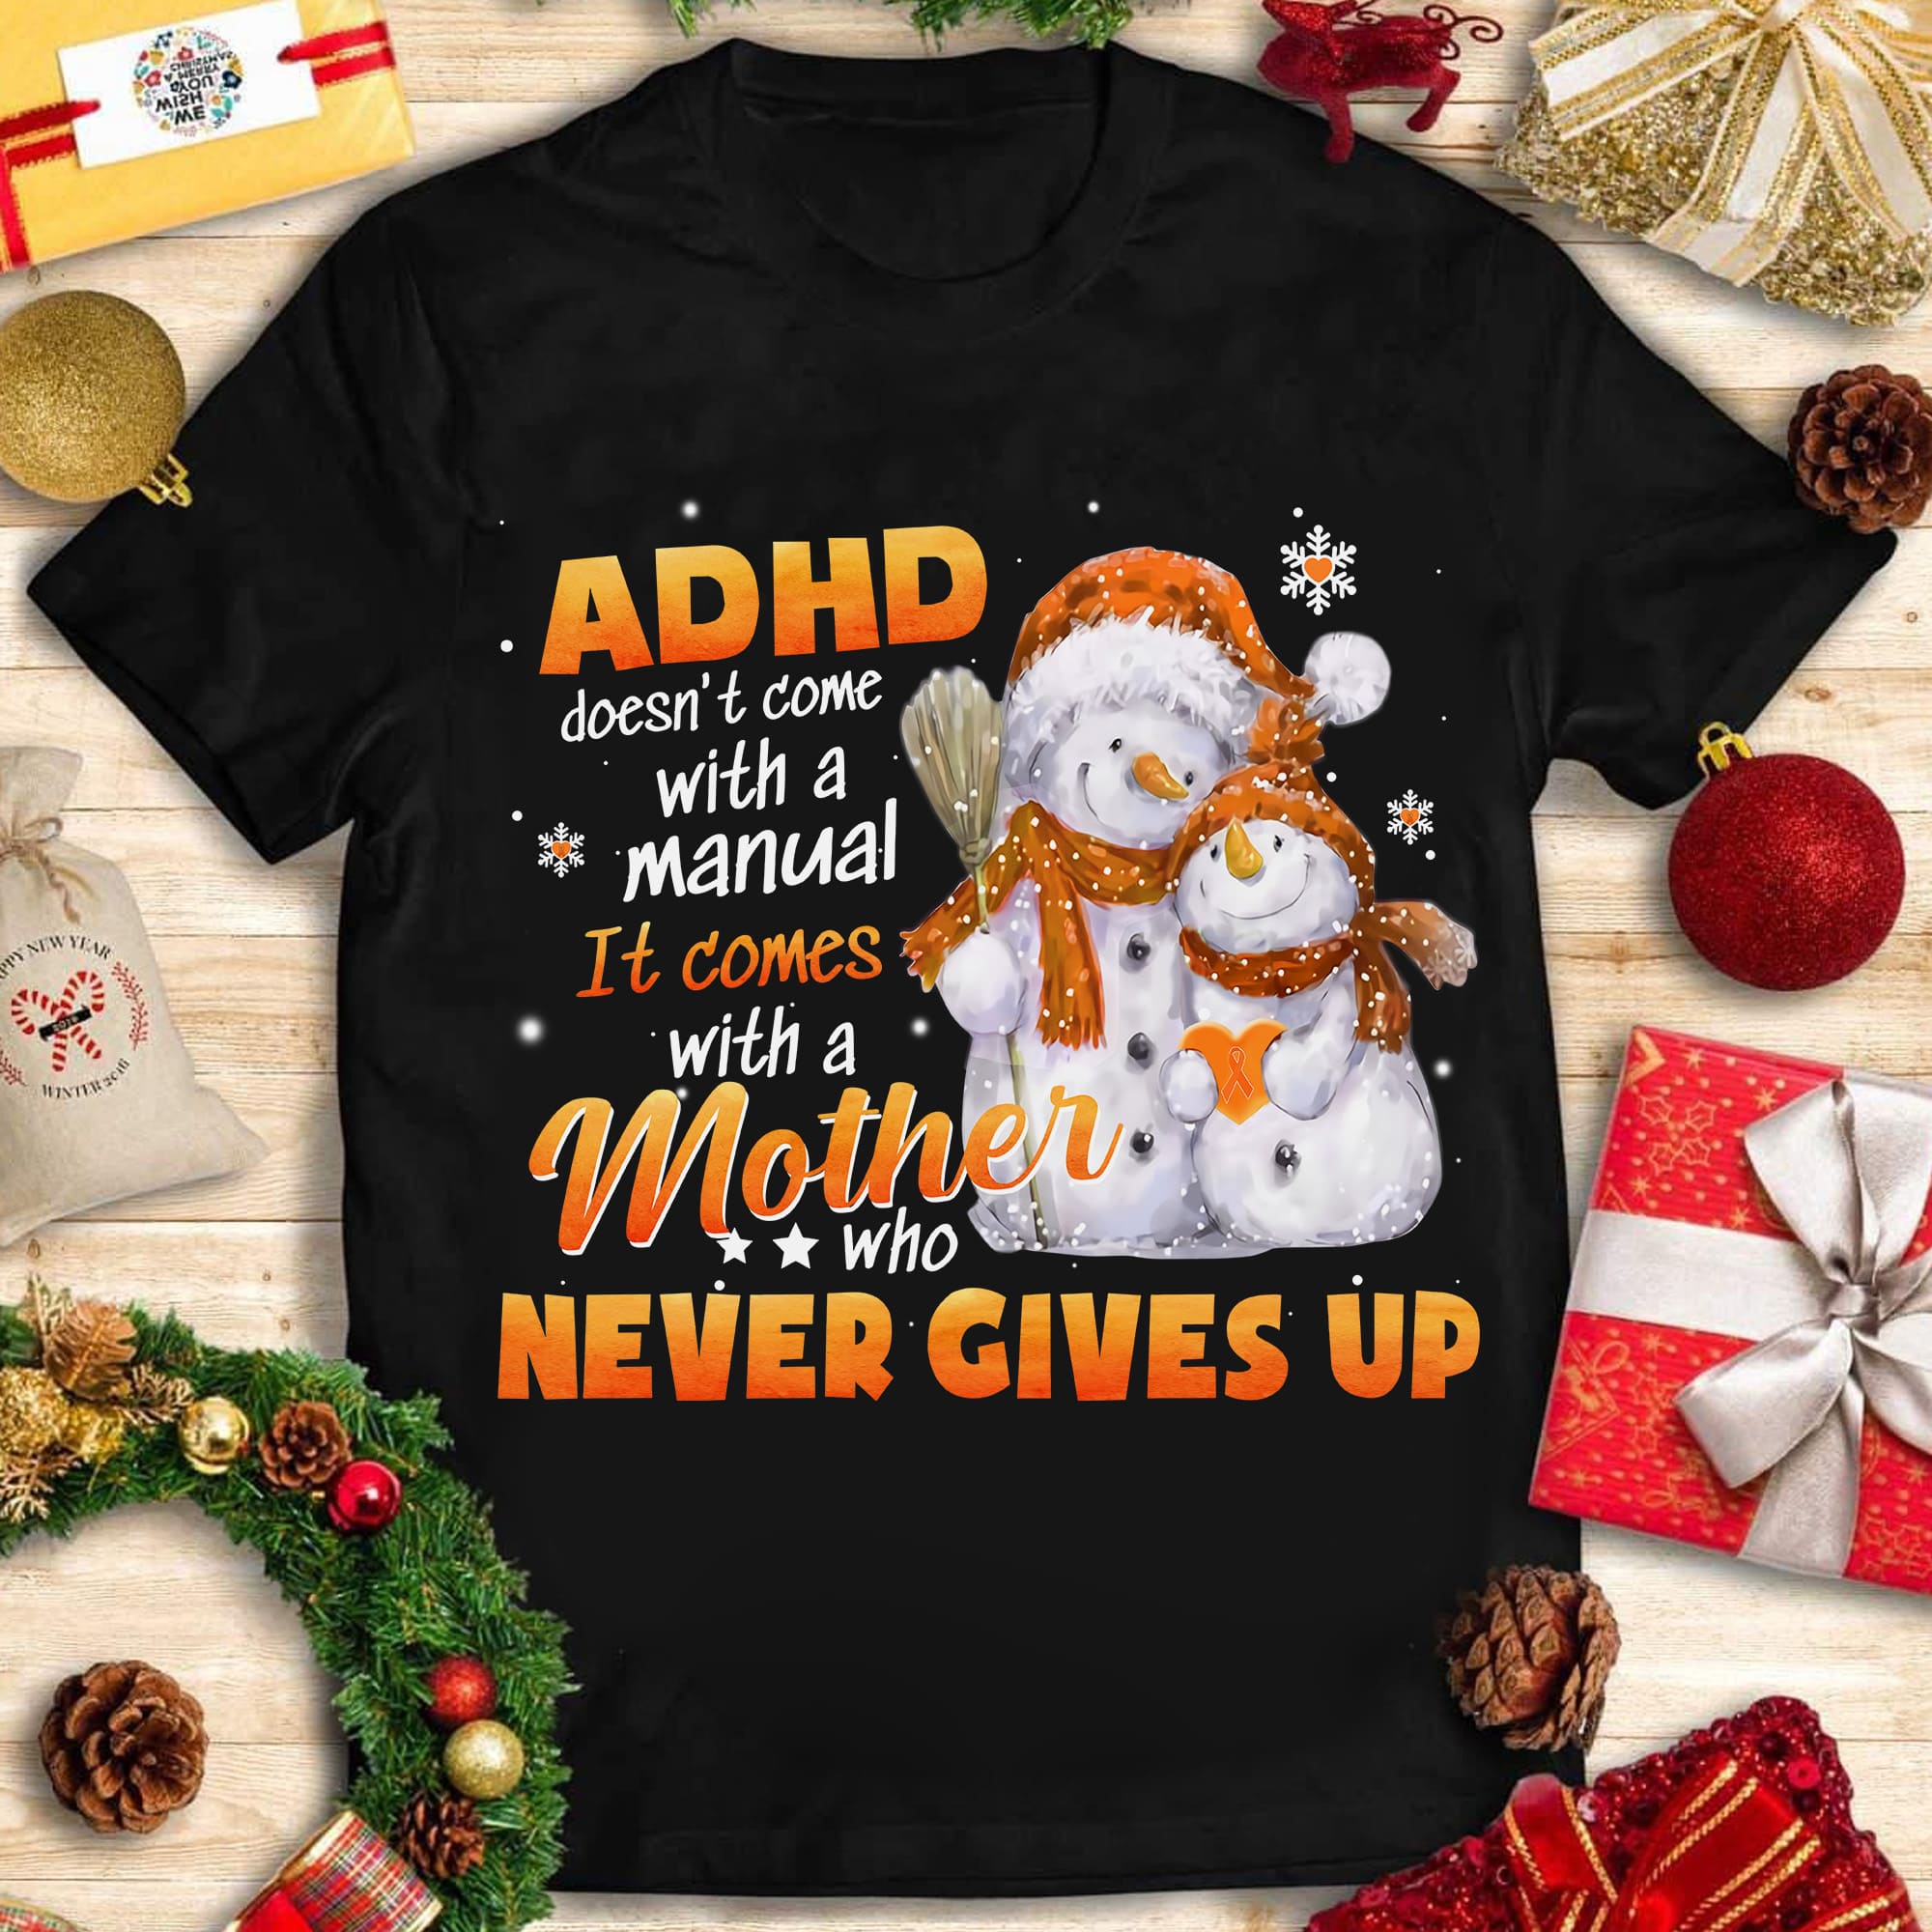 ADHD Snowman Family - ADHD doesn't come with a manual it comes with a mother who never gives up